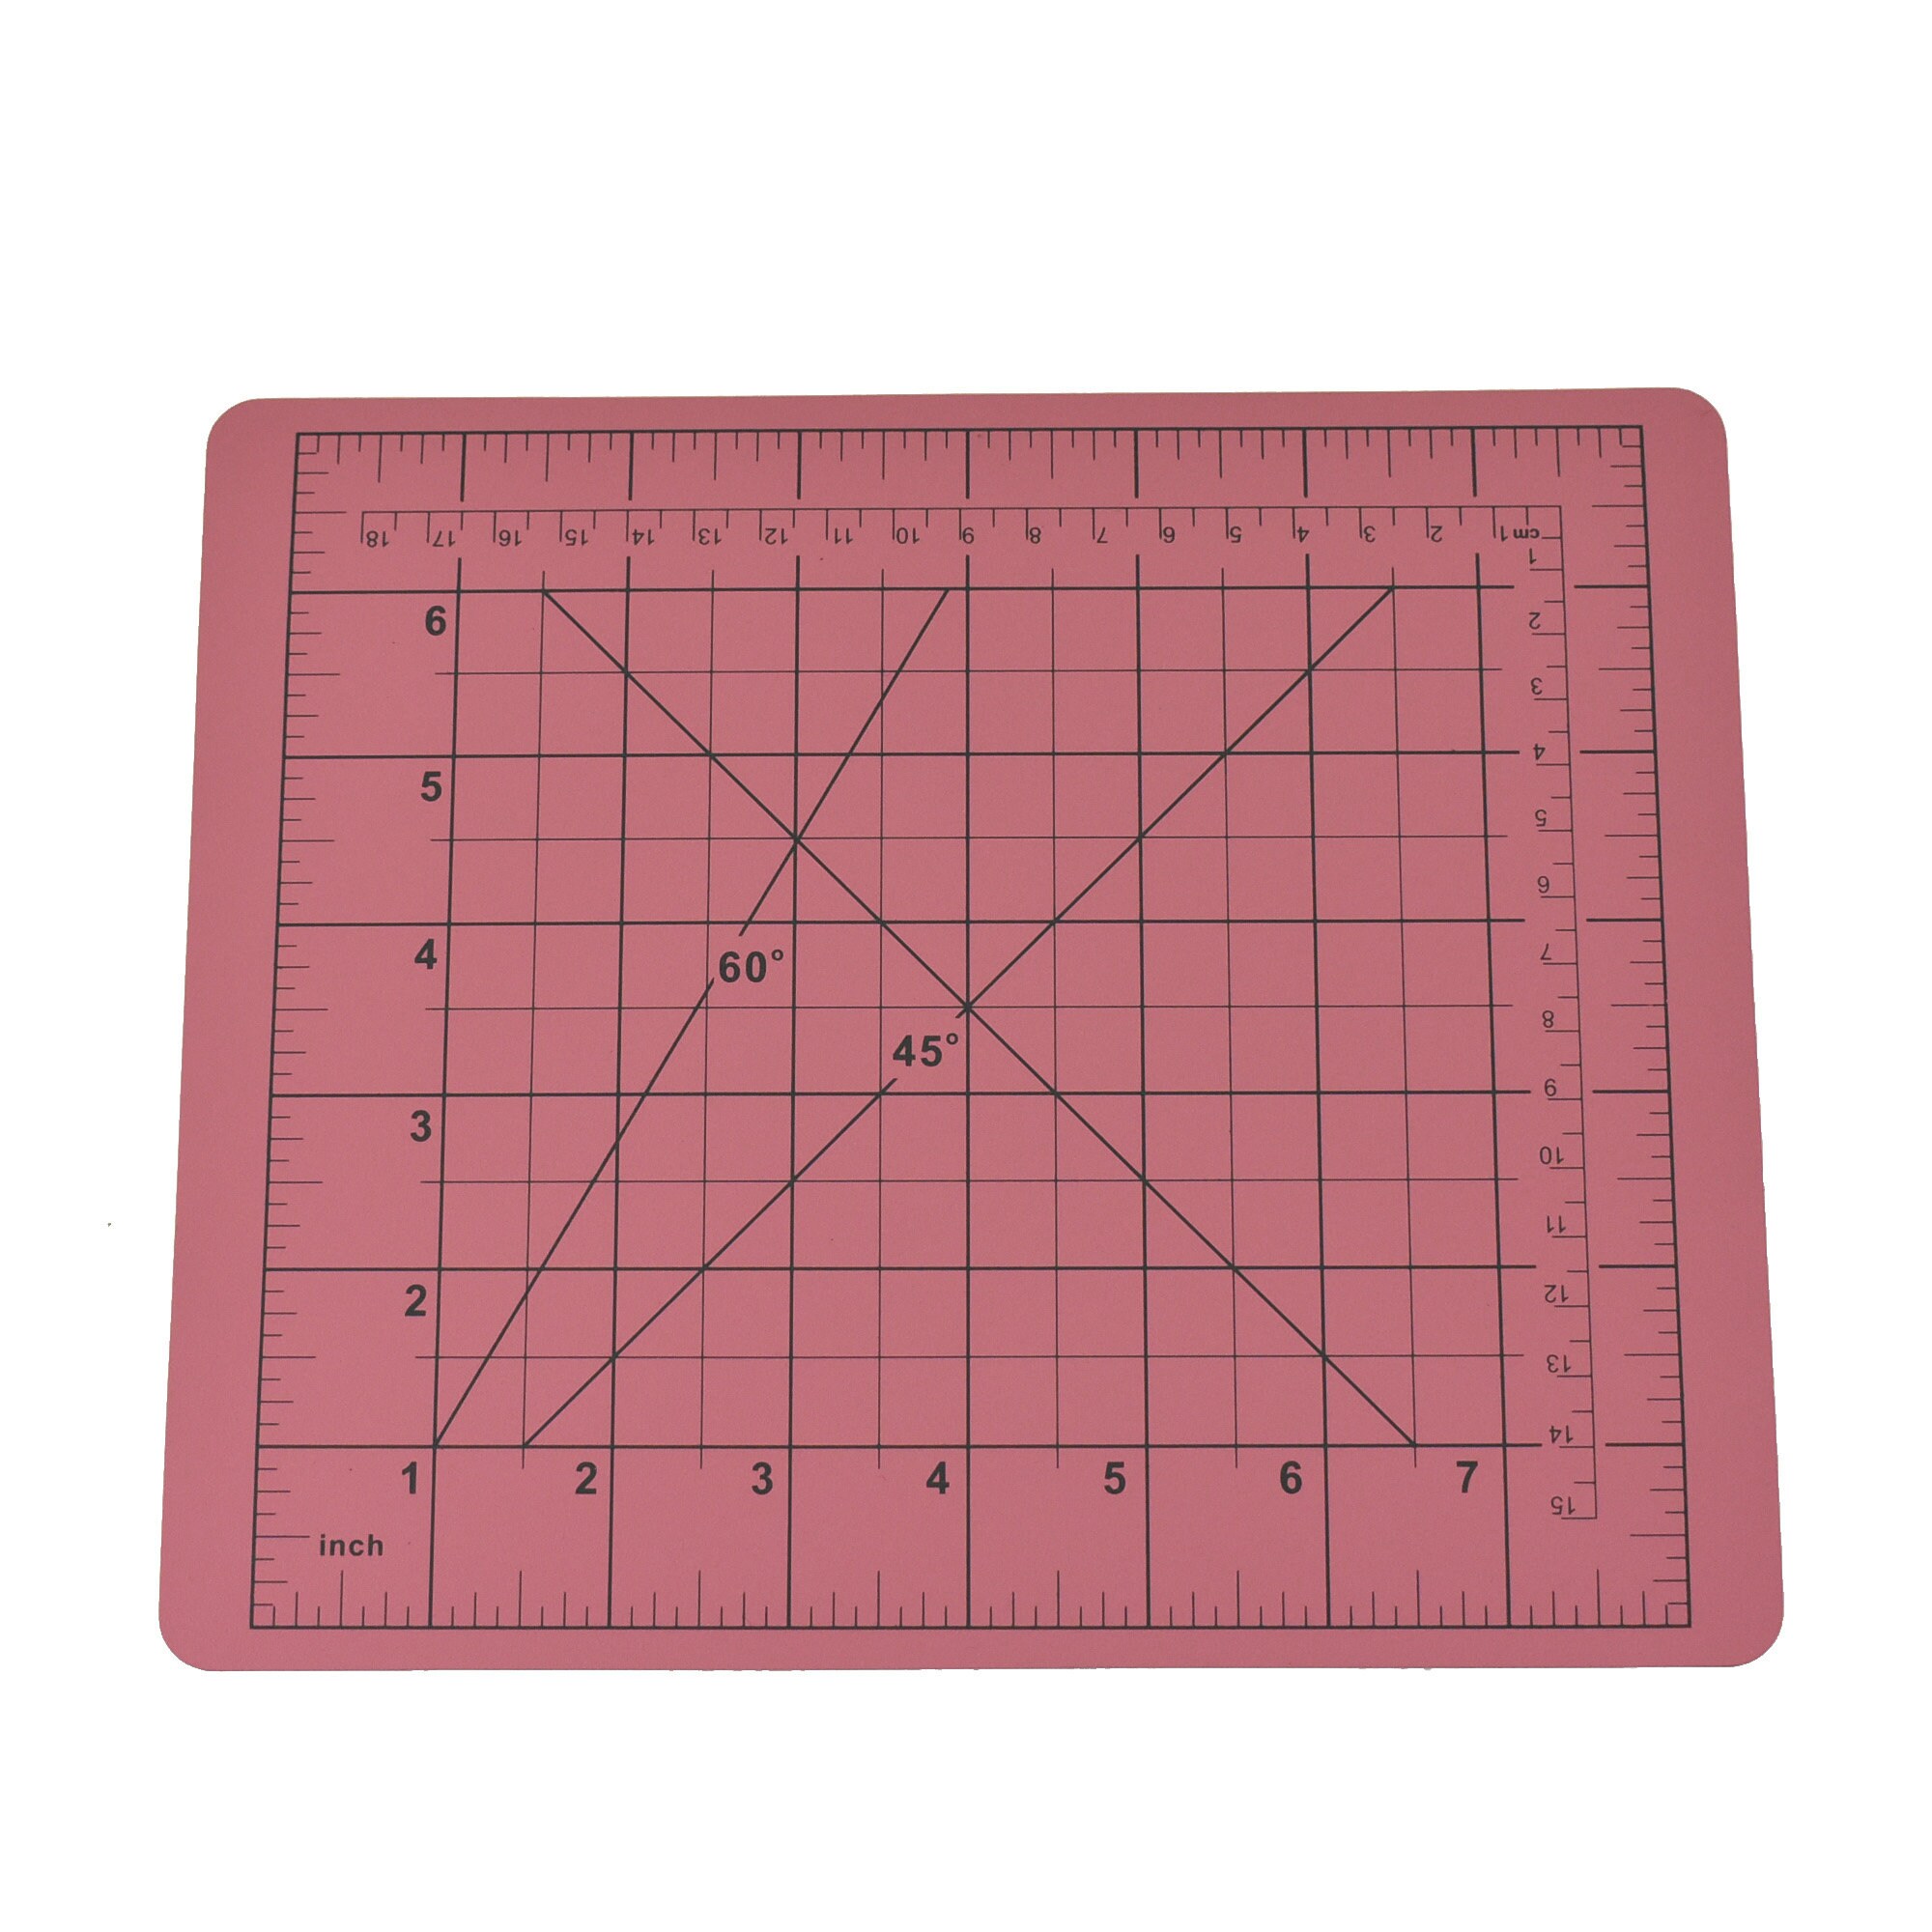 A4 Cutting Mat 12 x 9 Blue Craft Mat Non-Slip Cutting Board with 8  Stainless Steel Ruler for Sewing Quilting 